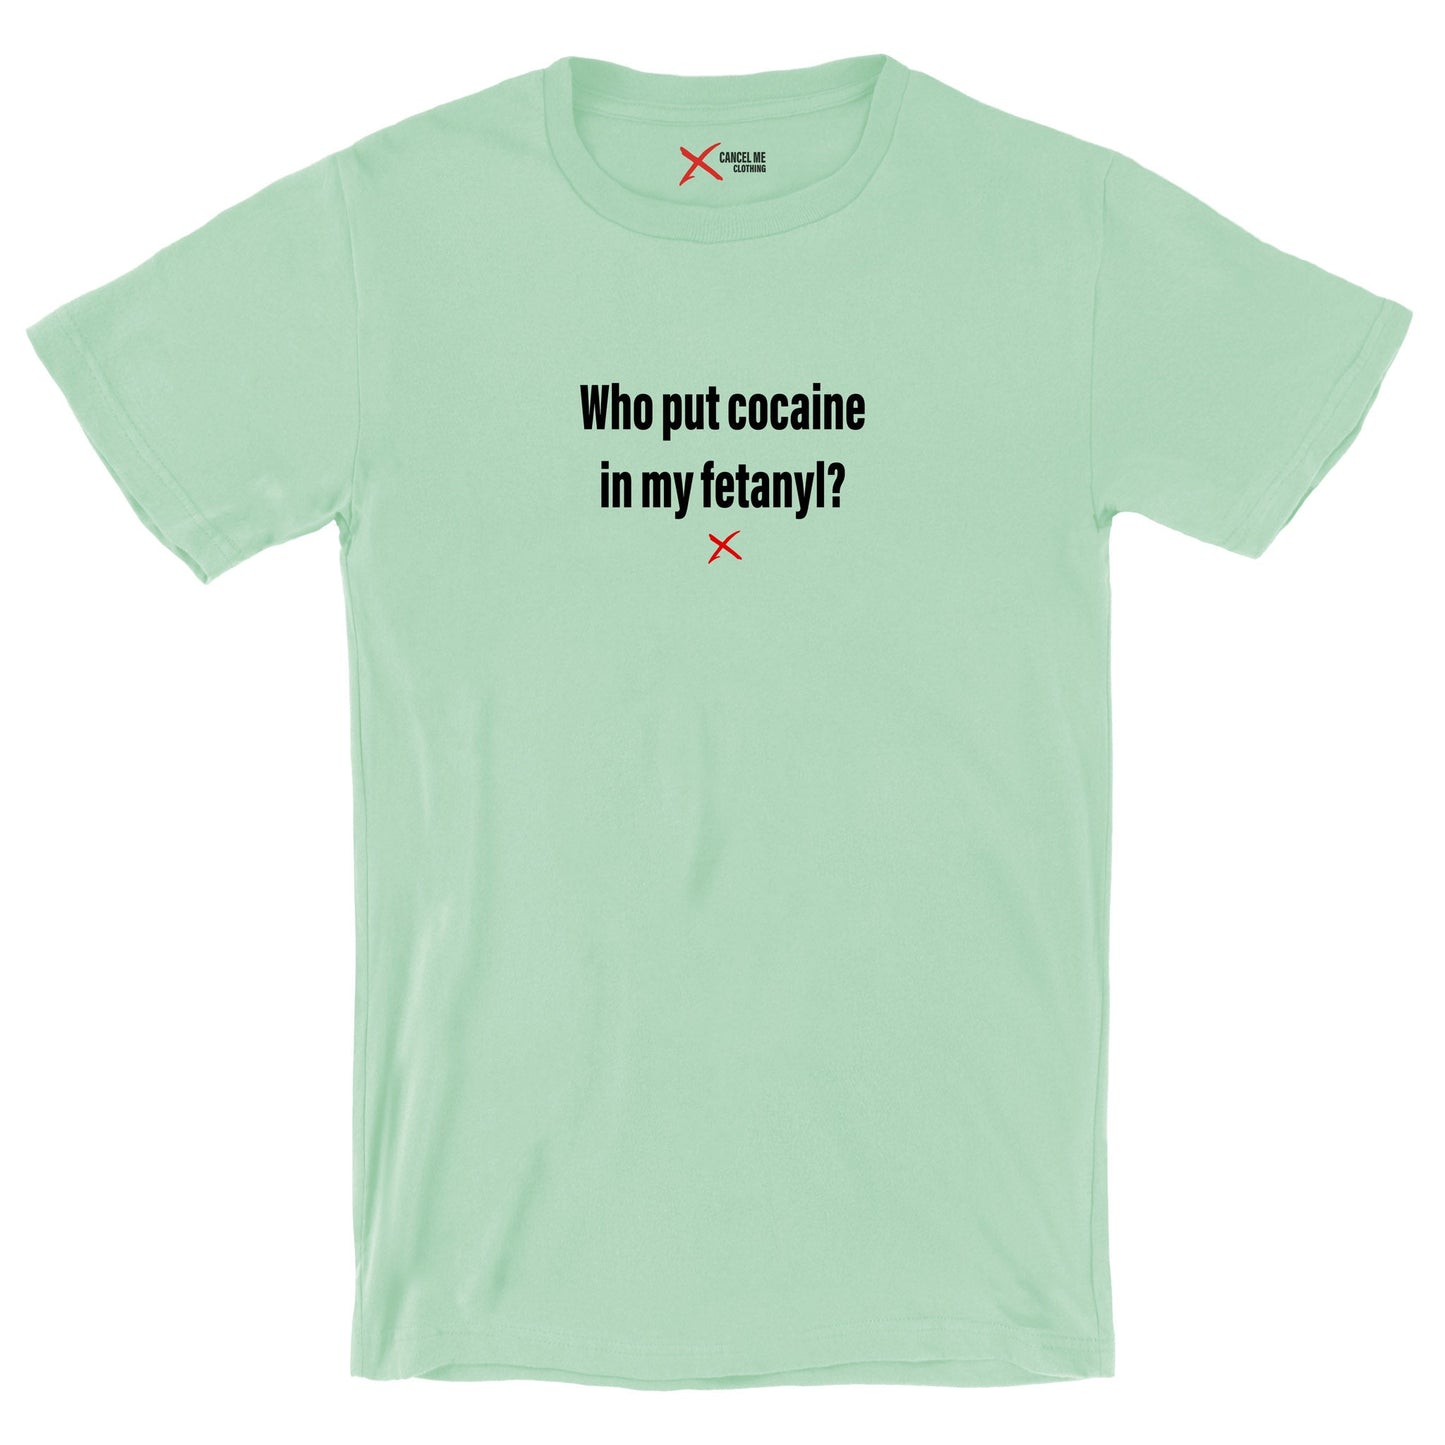 Who put cocaine in my fetanyl? - Shirt